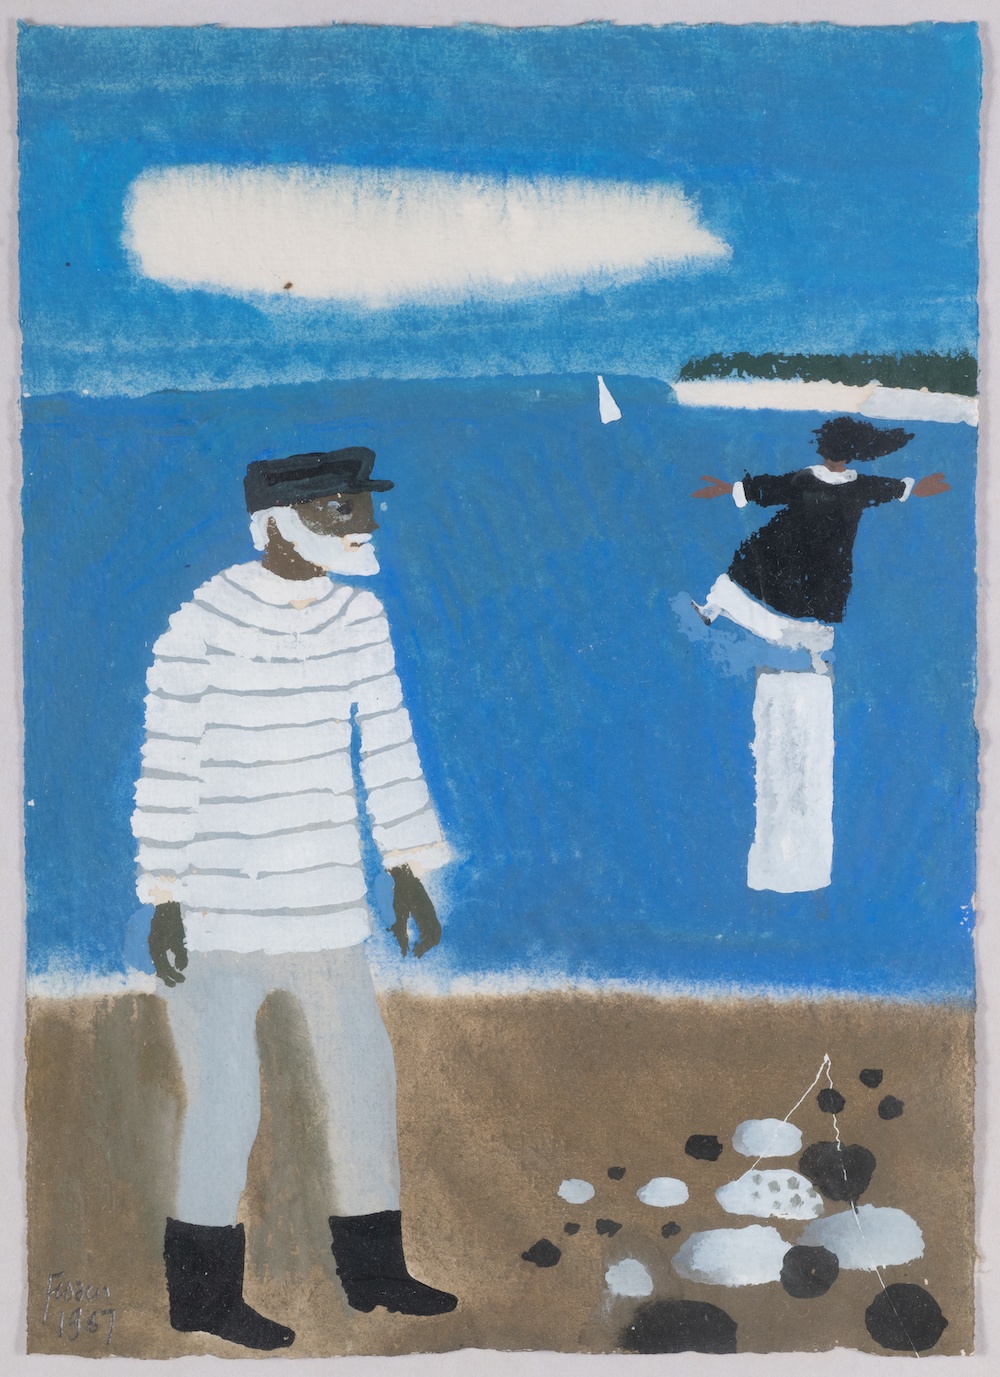 Julian Trevelyan on the beach, Mary in the background by Mary Fedden (1915 - 2012)